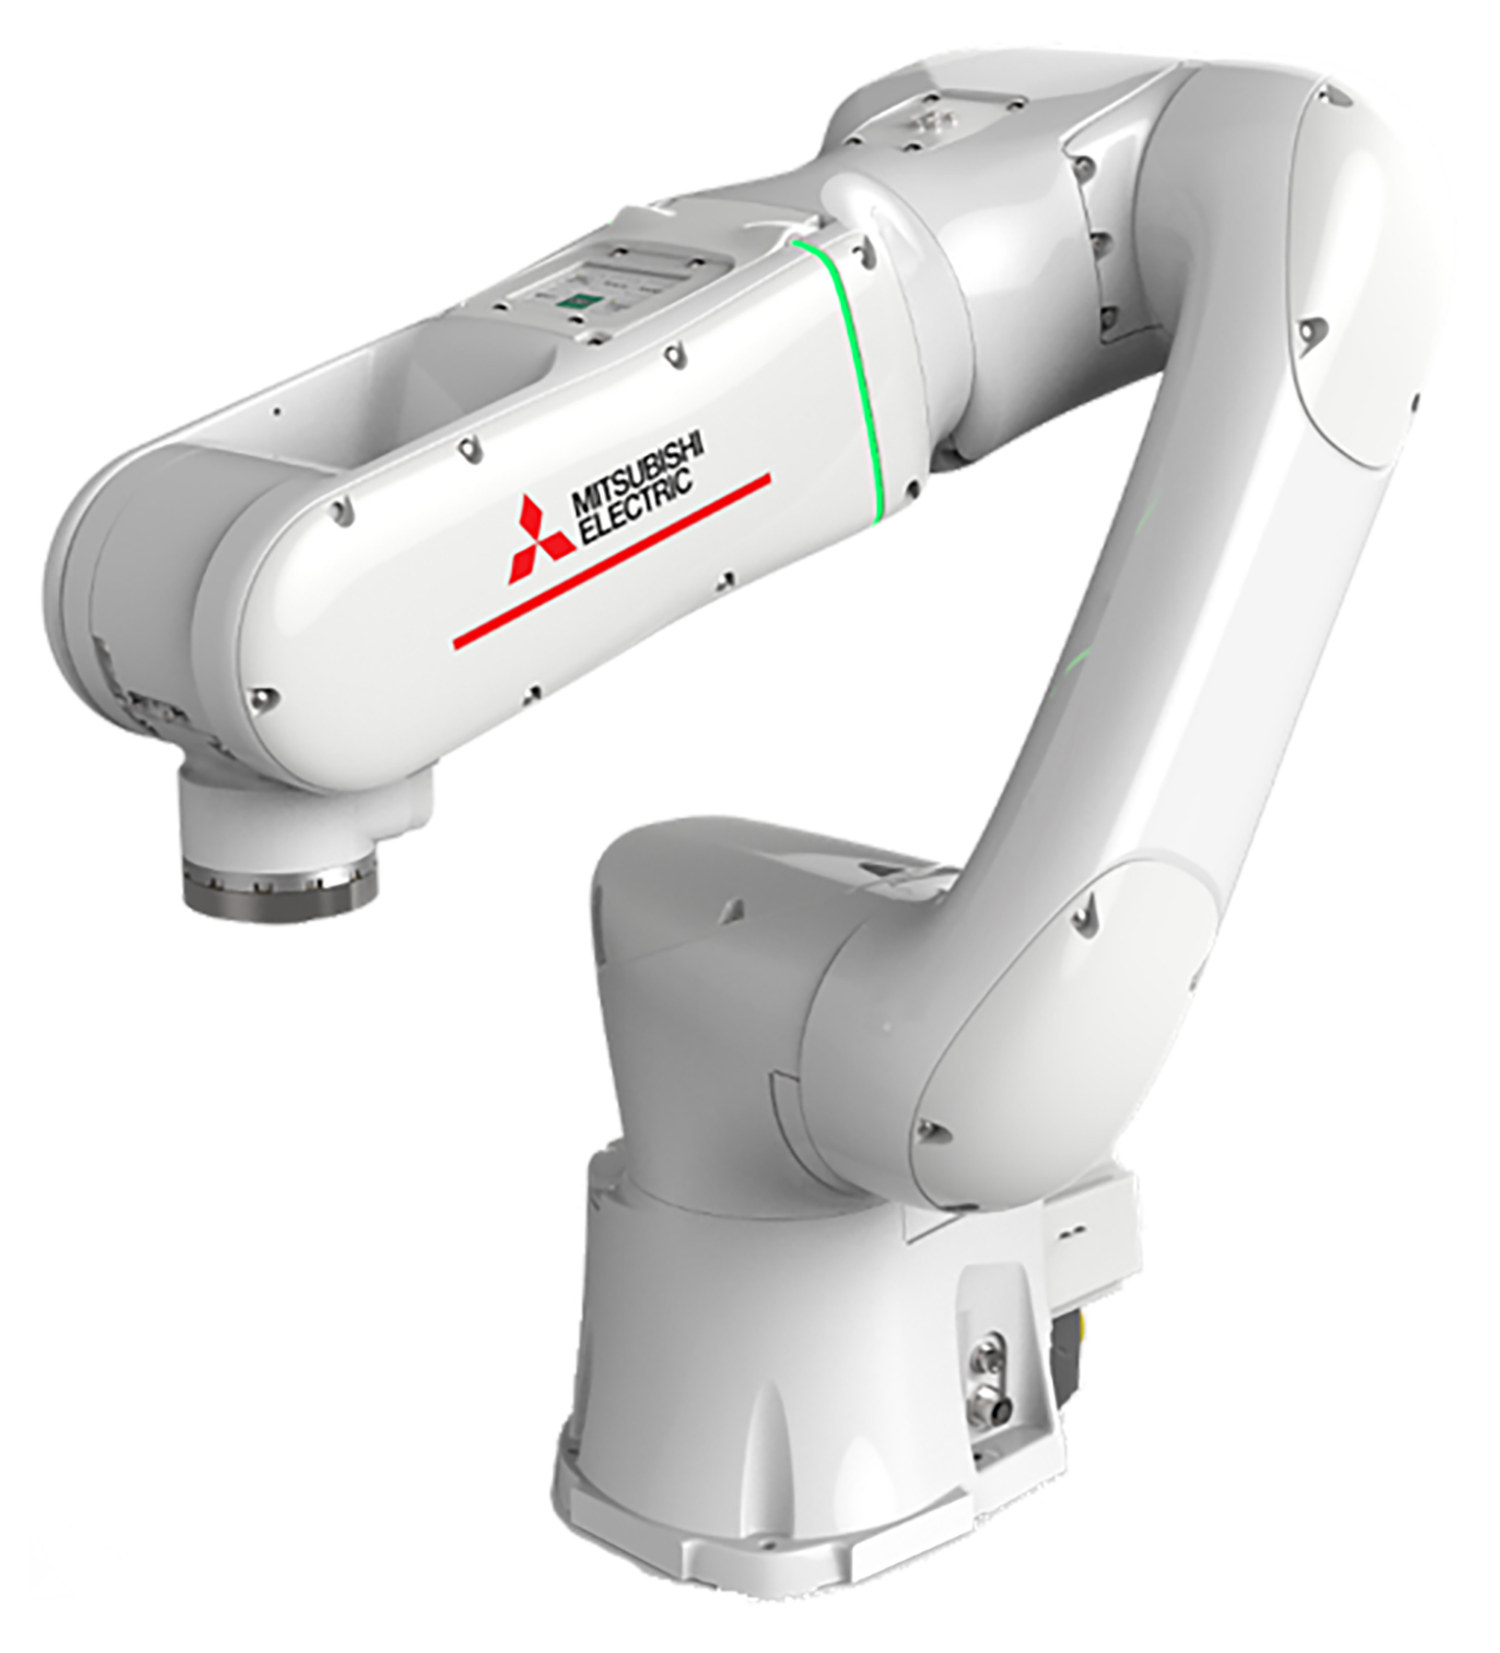 The partnership between Mitsubishi Electric and Realtime Robotics paves the way for multi-robot work cells that combine both industrial robots and purpose-designed collaborative robots to work alongside people. [Source: Mitsubishi Electric Europe B.V.]